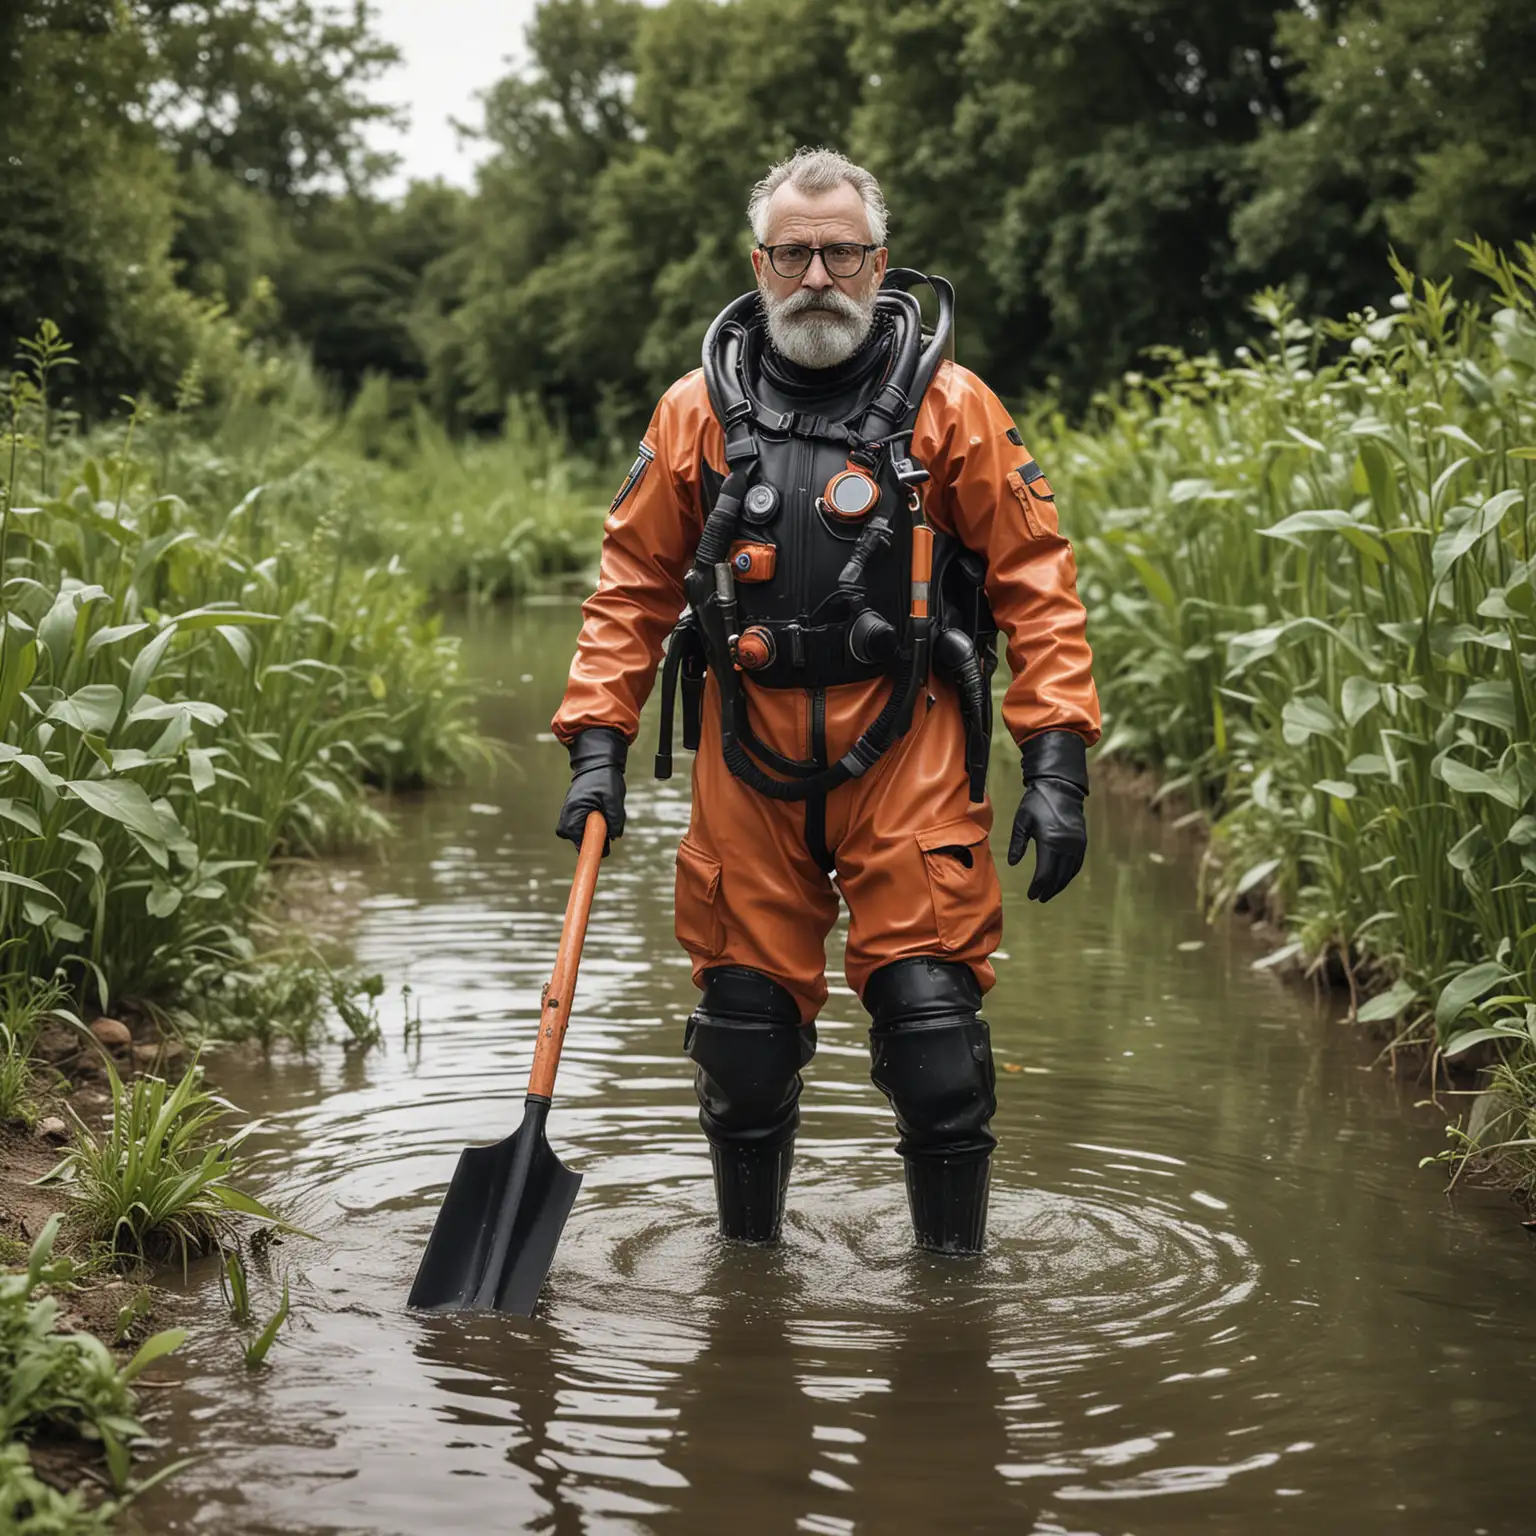 Middleaged Diver with Garden Tools in Flooded Countryside